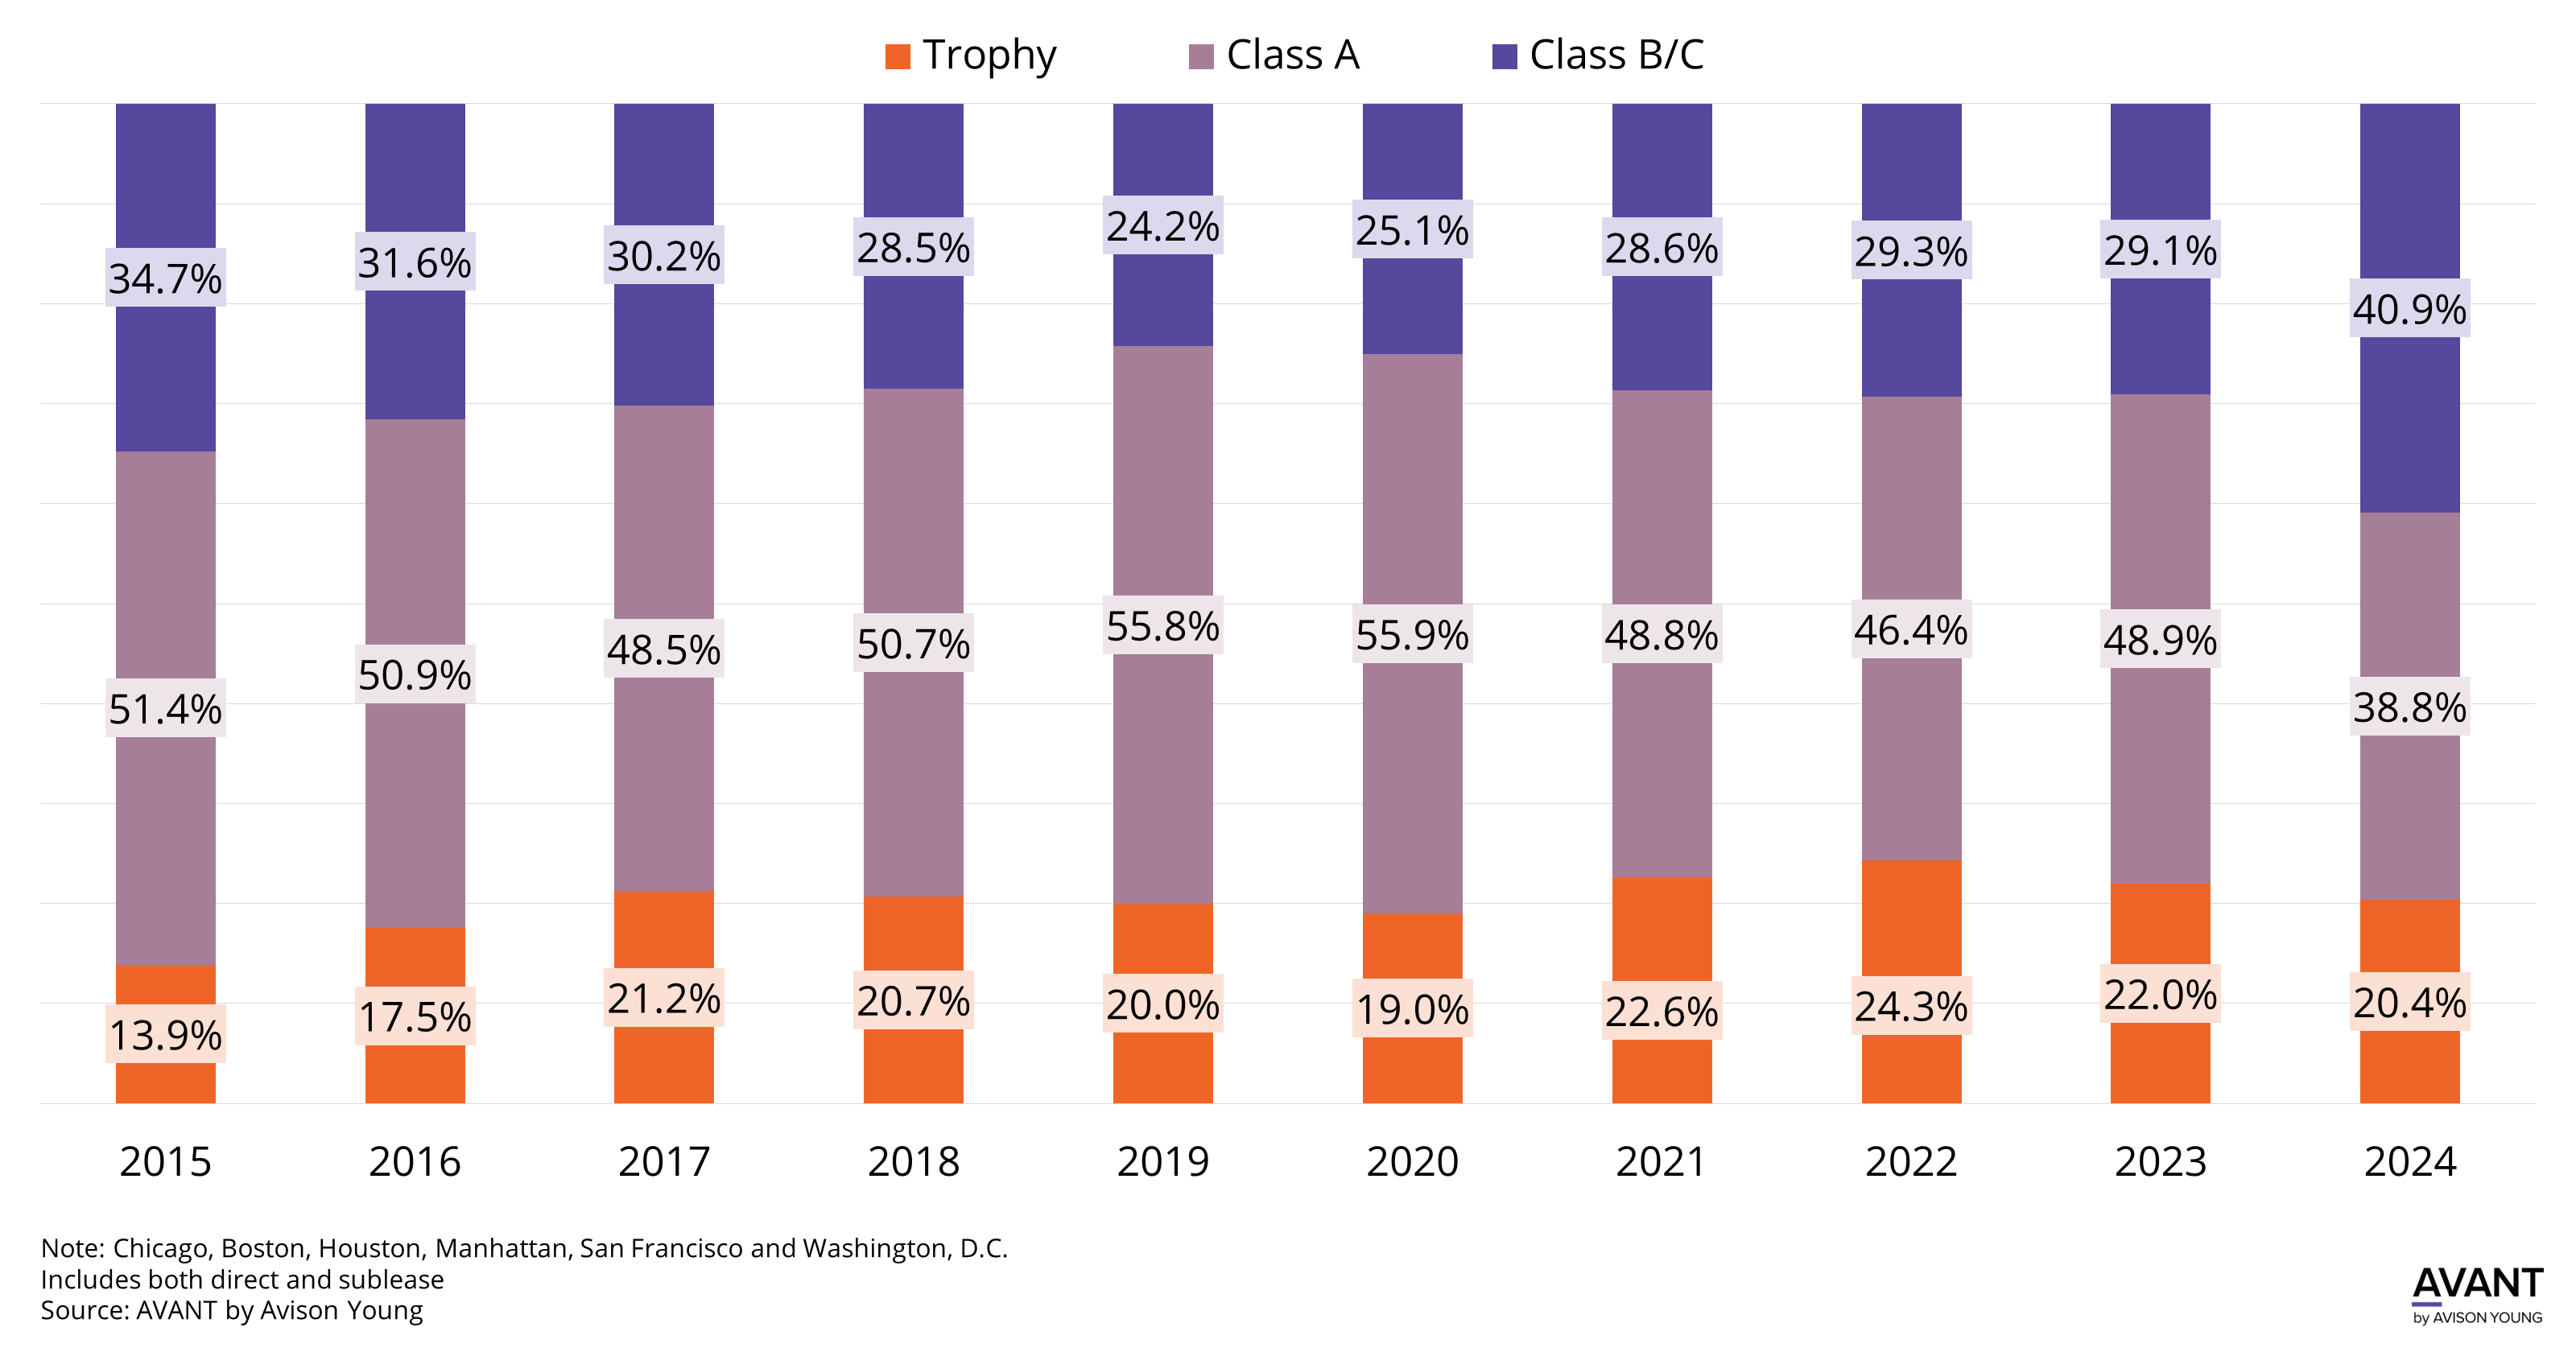 graph of U.S. office availability by class type (trophy, class A, class B/C) from 2015 to 2024